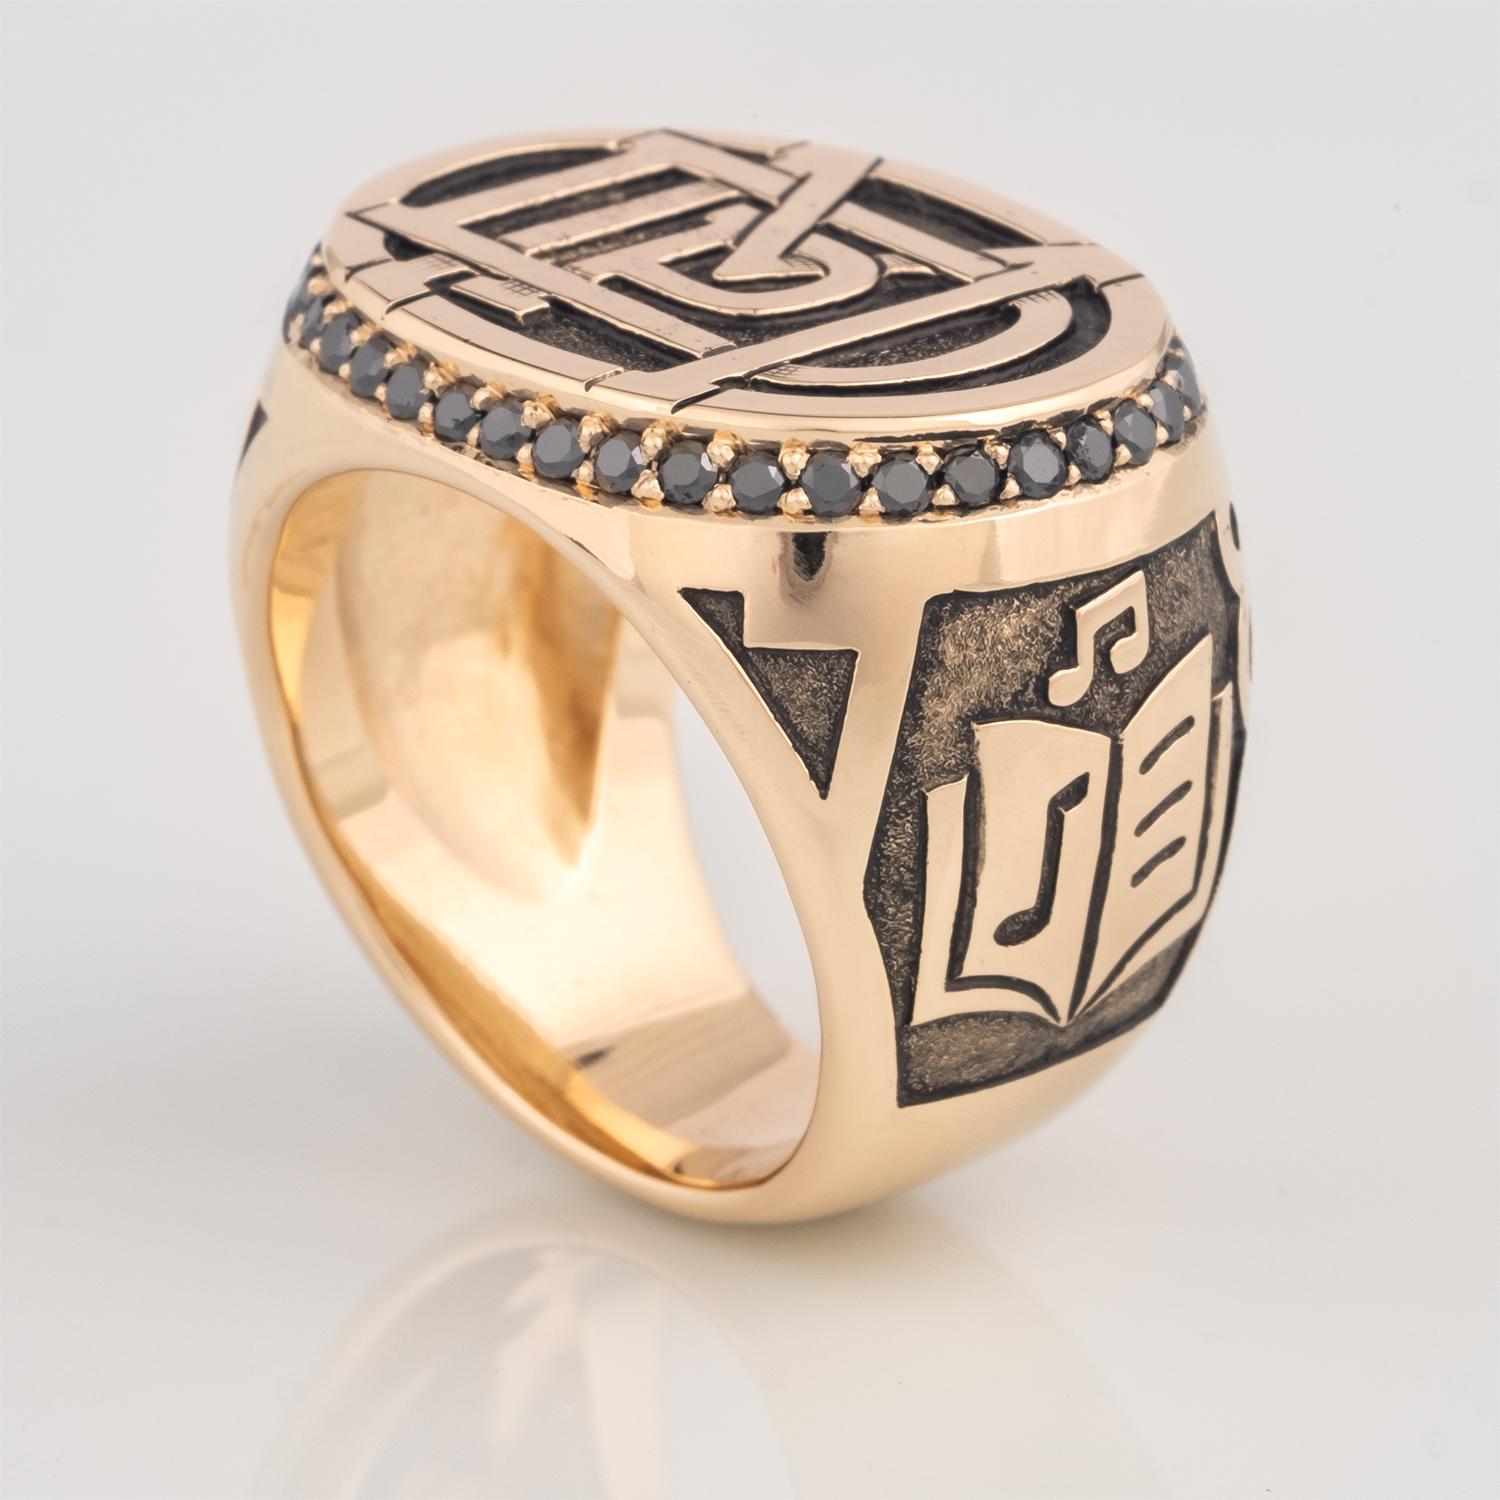 For Sale:  Commission a Personalized Monogram Signet Ring 5